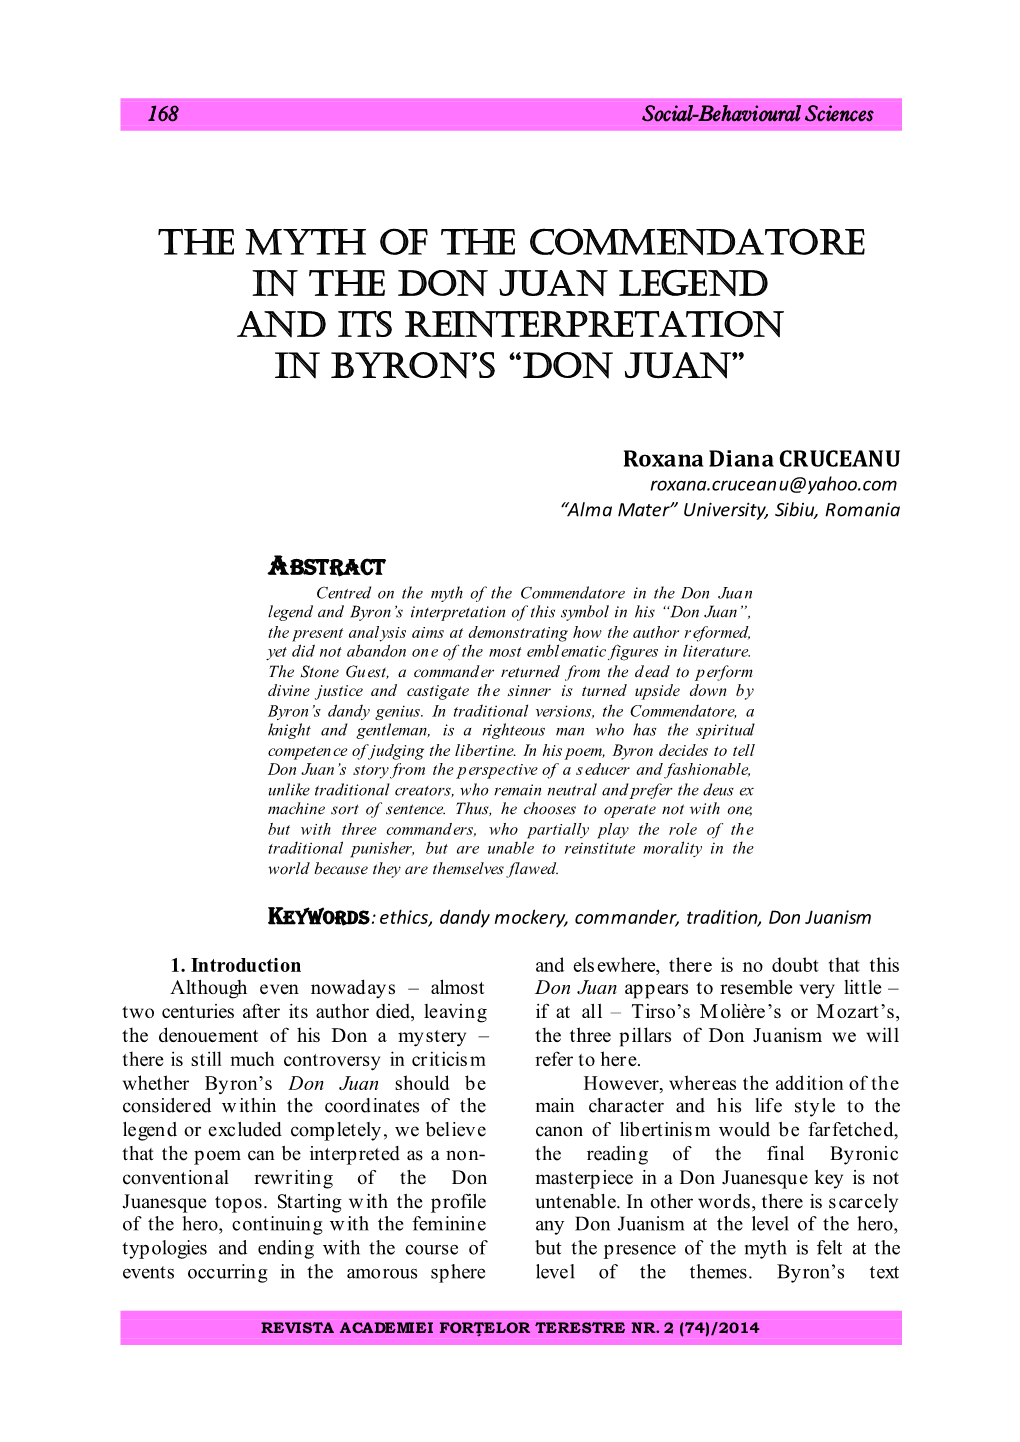 The Myth of the Commendatore in the Don Juan Legend and Its Reinterpretation in Byron's “Don Juan”